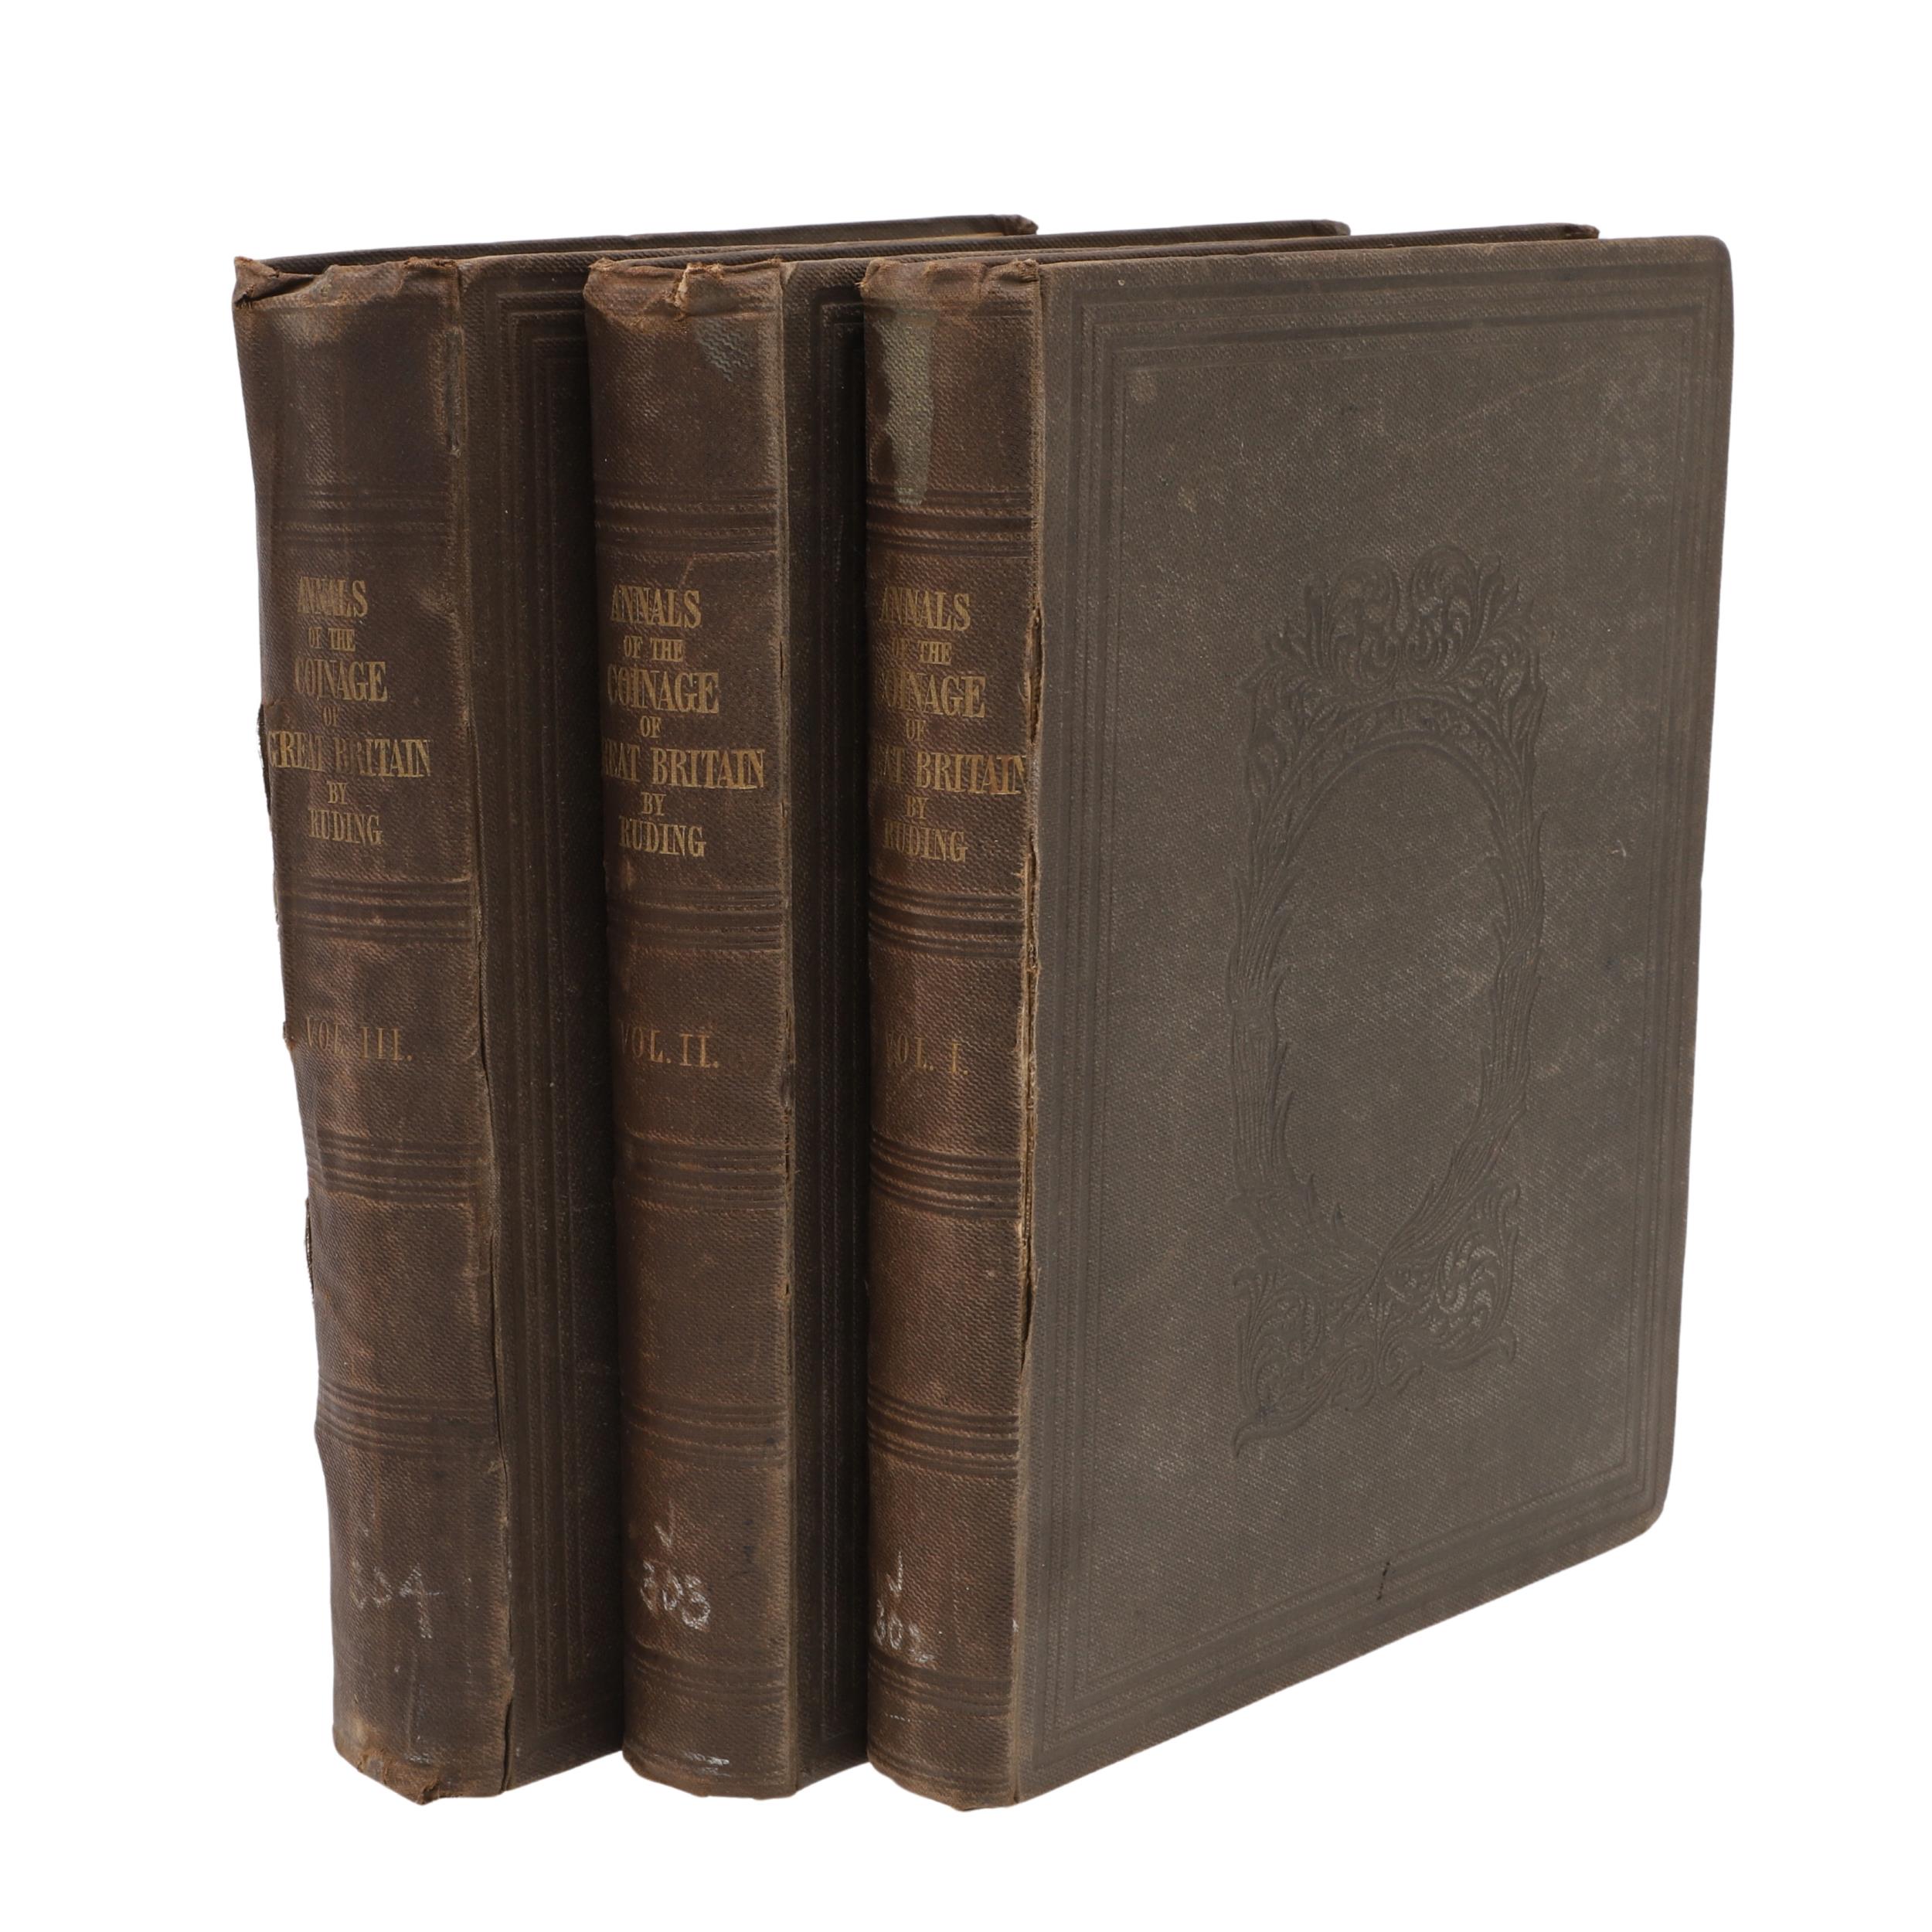 ANNALS OF THE COINAGE OF GREAT BRITAIN, 1840, THE REV. ROGERS RUDING. 3 VOLUMES.